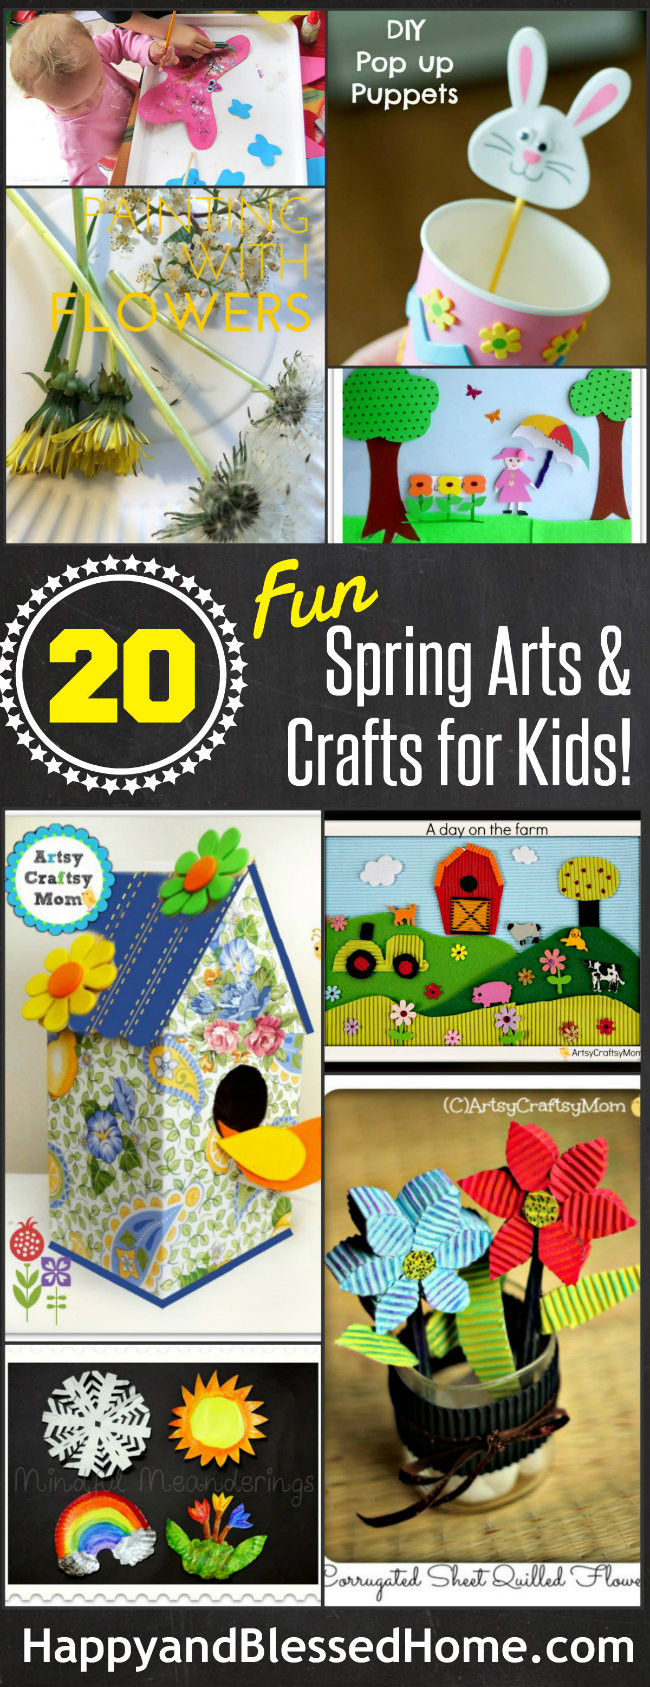 Toddler Arts And Craft Projects
 The Ultimate List of 20 Spring Arts and Crafts for Kids